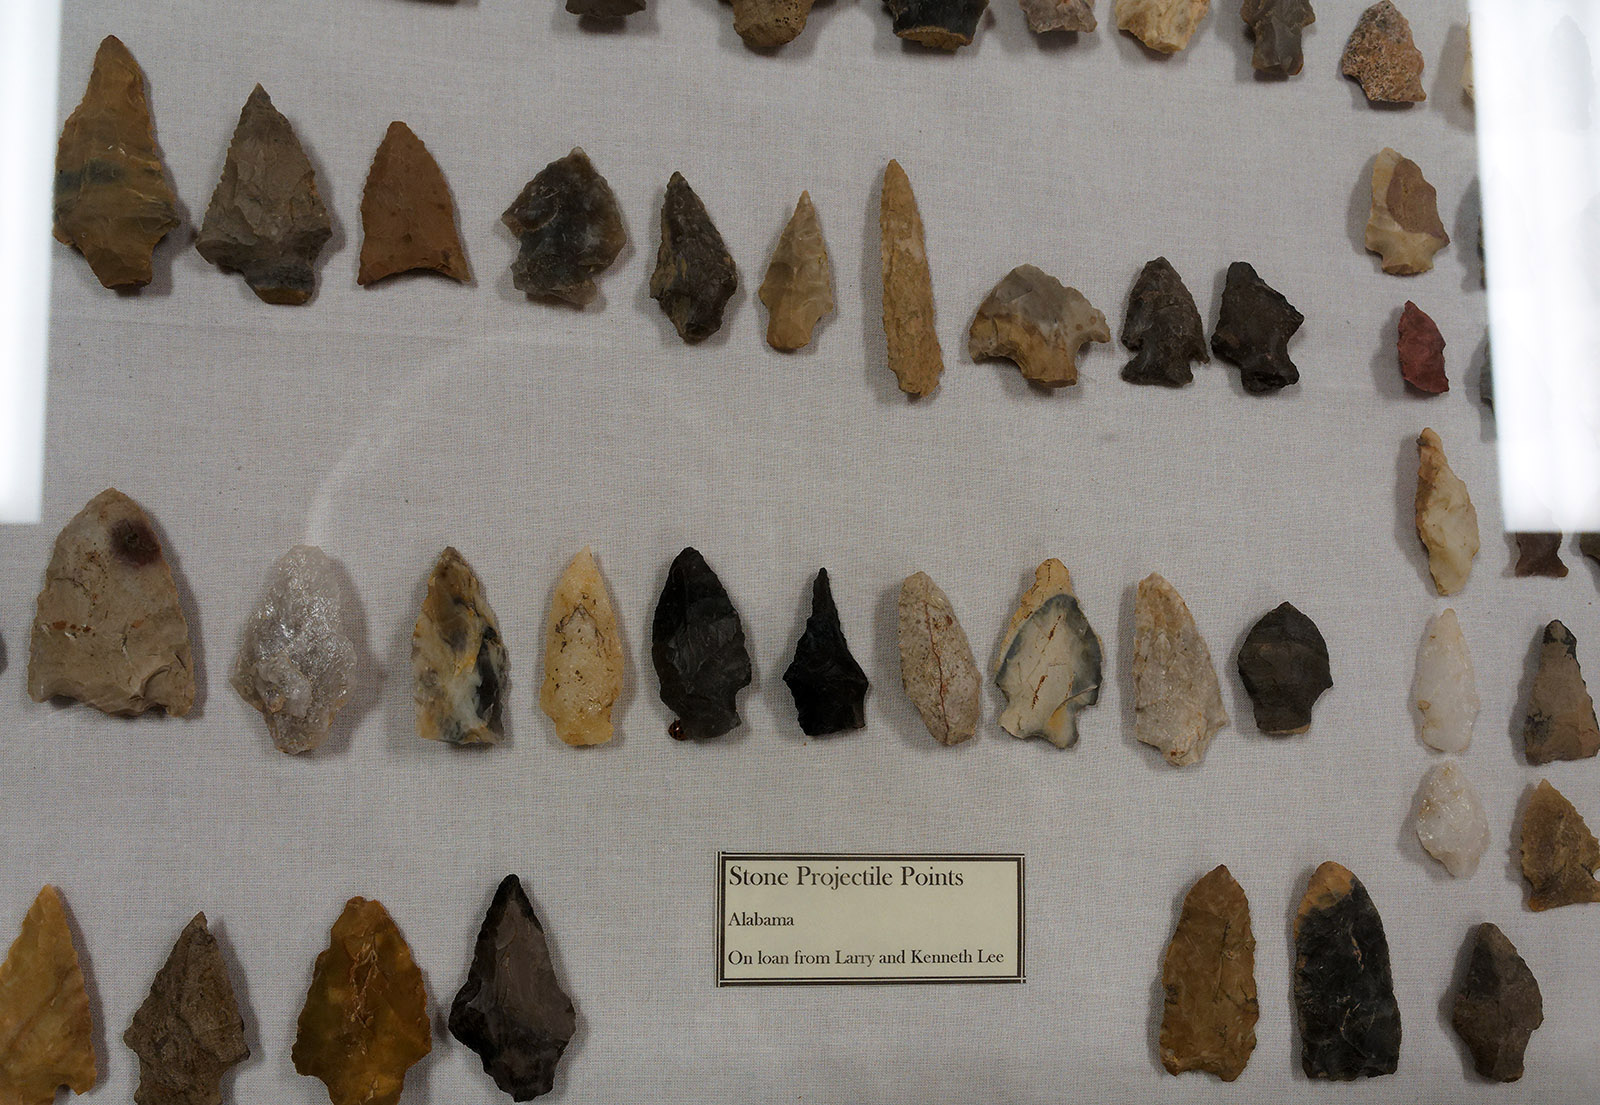 Projectile points (mostly chert) collected in Alabama.  Indigenous populations trace back 10,000 years before European fortune hunters and colonialists penetrated what is now Alabama.  Beginning in the early 1800’s, cultural groups designated as Cherokees, Choctaws, Creeks, Chickasaws, Alabama-Coushattas, and Yuchis came under pressure from U.S./European settlers in the form of warfare, other assaults on land, and spread of non-native diseases.  In the 1830’s, the majority of Native Americans were forced from their land to make way for cotton plantations and other European American expansion.